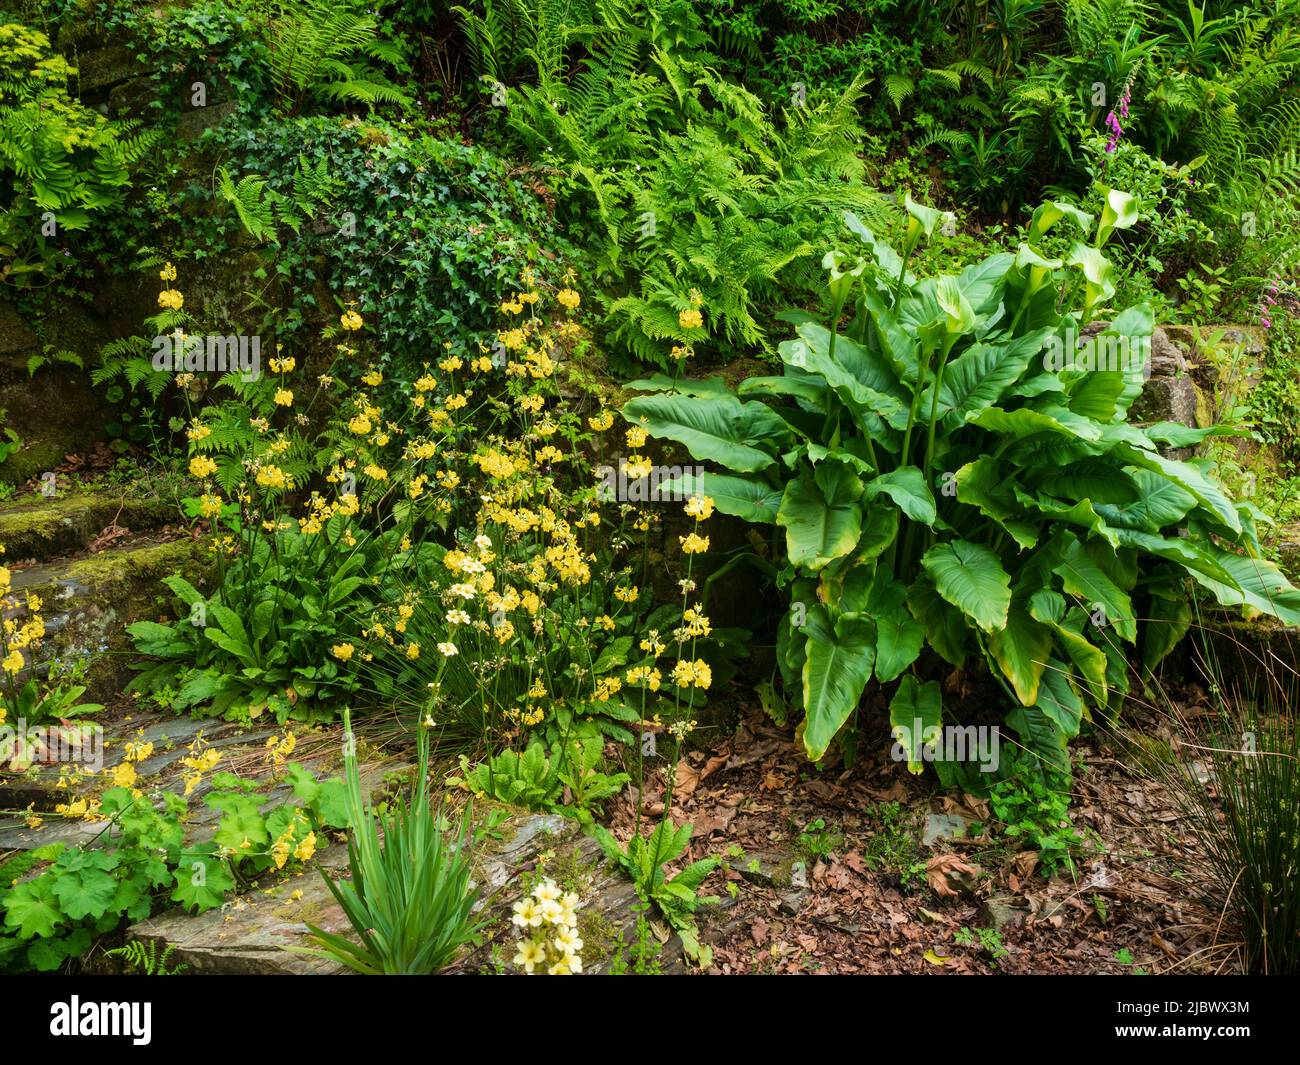 Large leaved green and white spathed calla lily, Zantedeschia aethiopica 'Green Goddess' grows next to the candelabra primula, Primula helodoxa Stock Photo